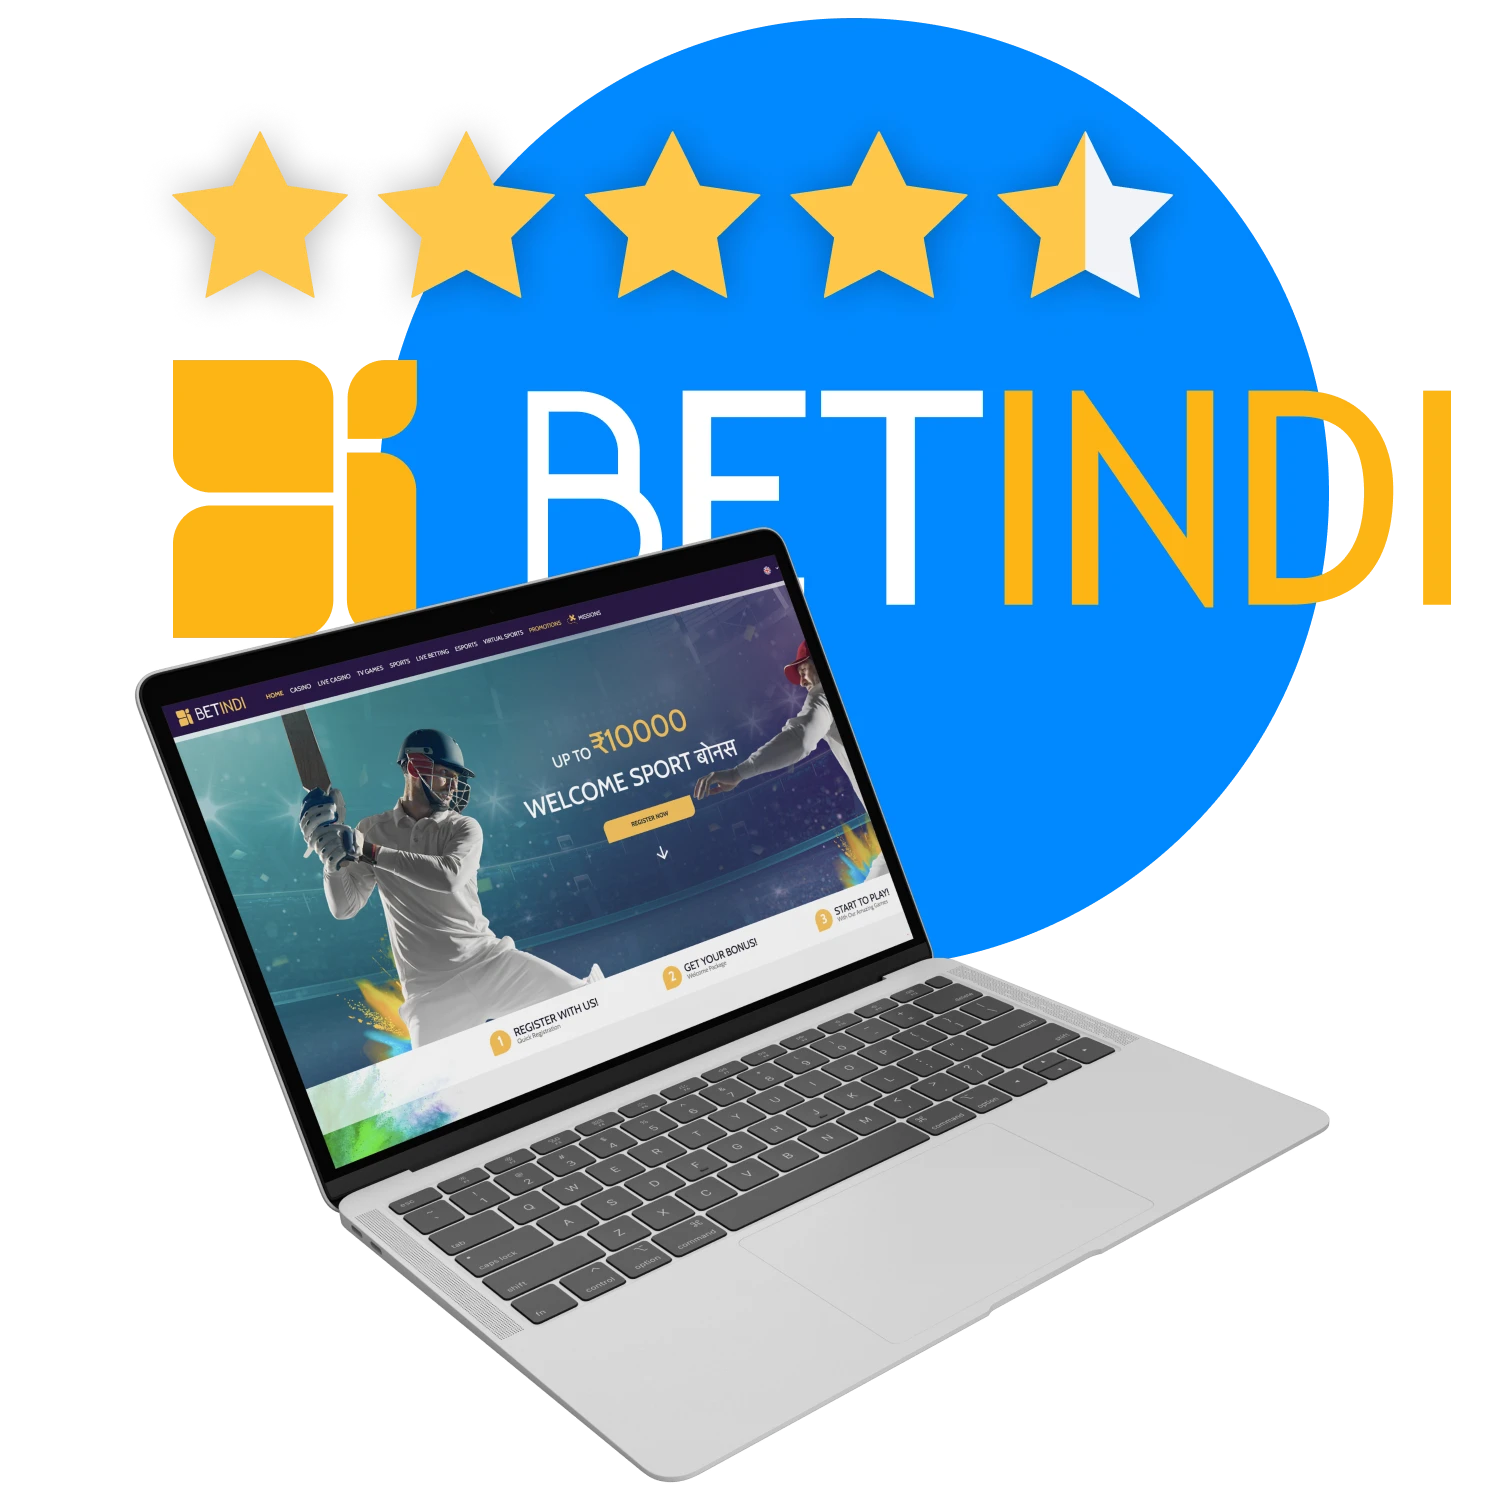 Verified reviews of Betindi in India.